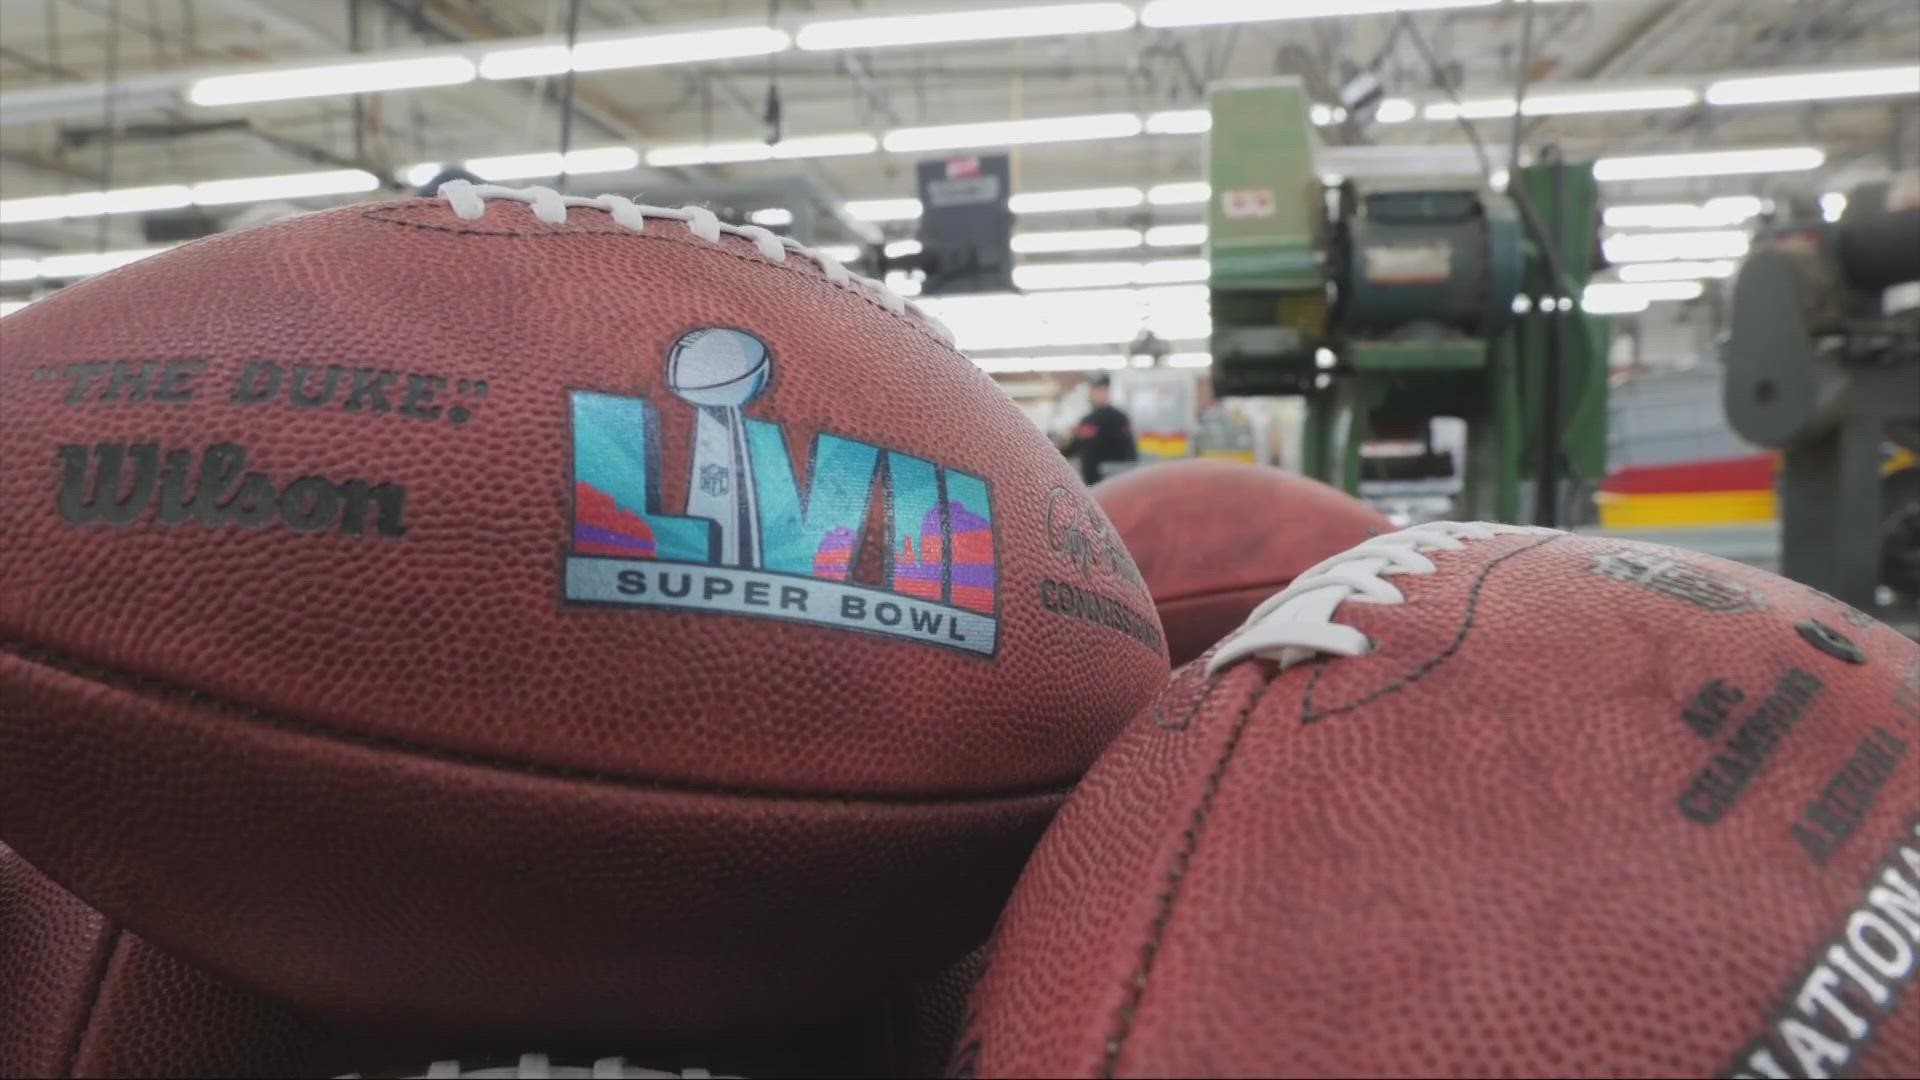 For decades, every Super Bowl football has been made in a small community in northwest Ohio.